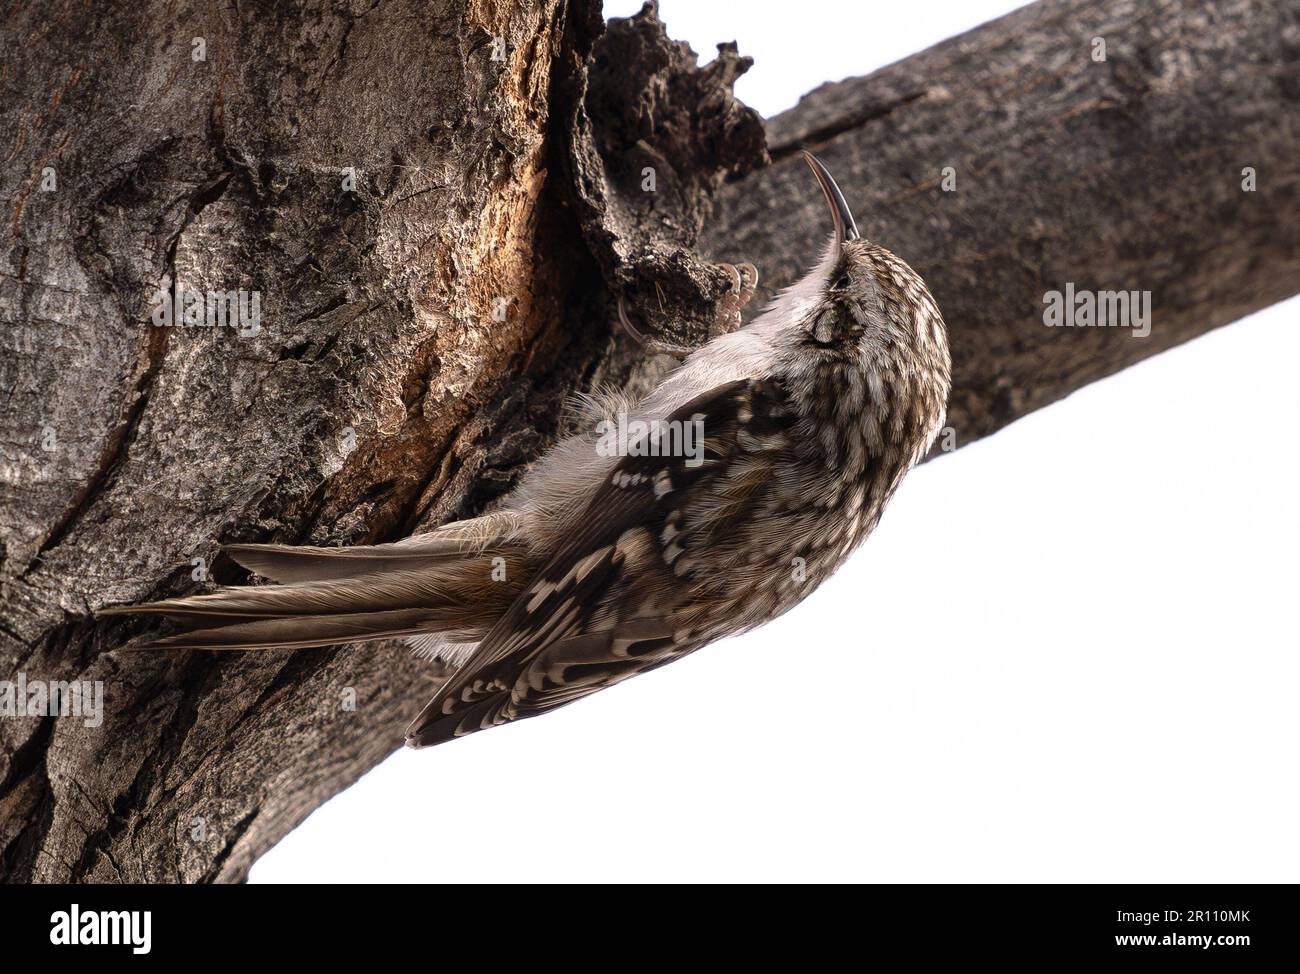 A Brown Creeper bird (Certhia americana) clinging to the bark of a tree trunk with its sharp talons in Wintertime. Close up view. Stock Photo